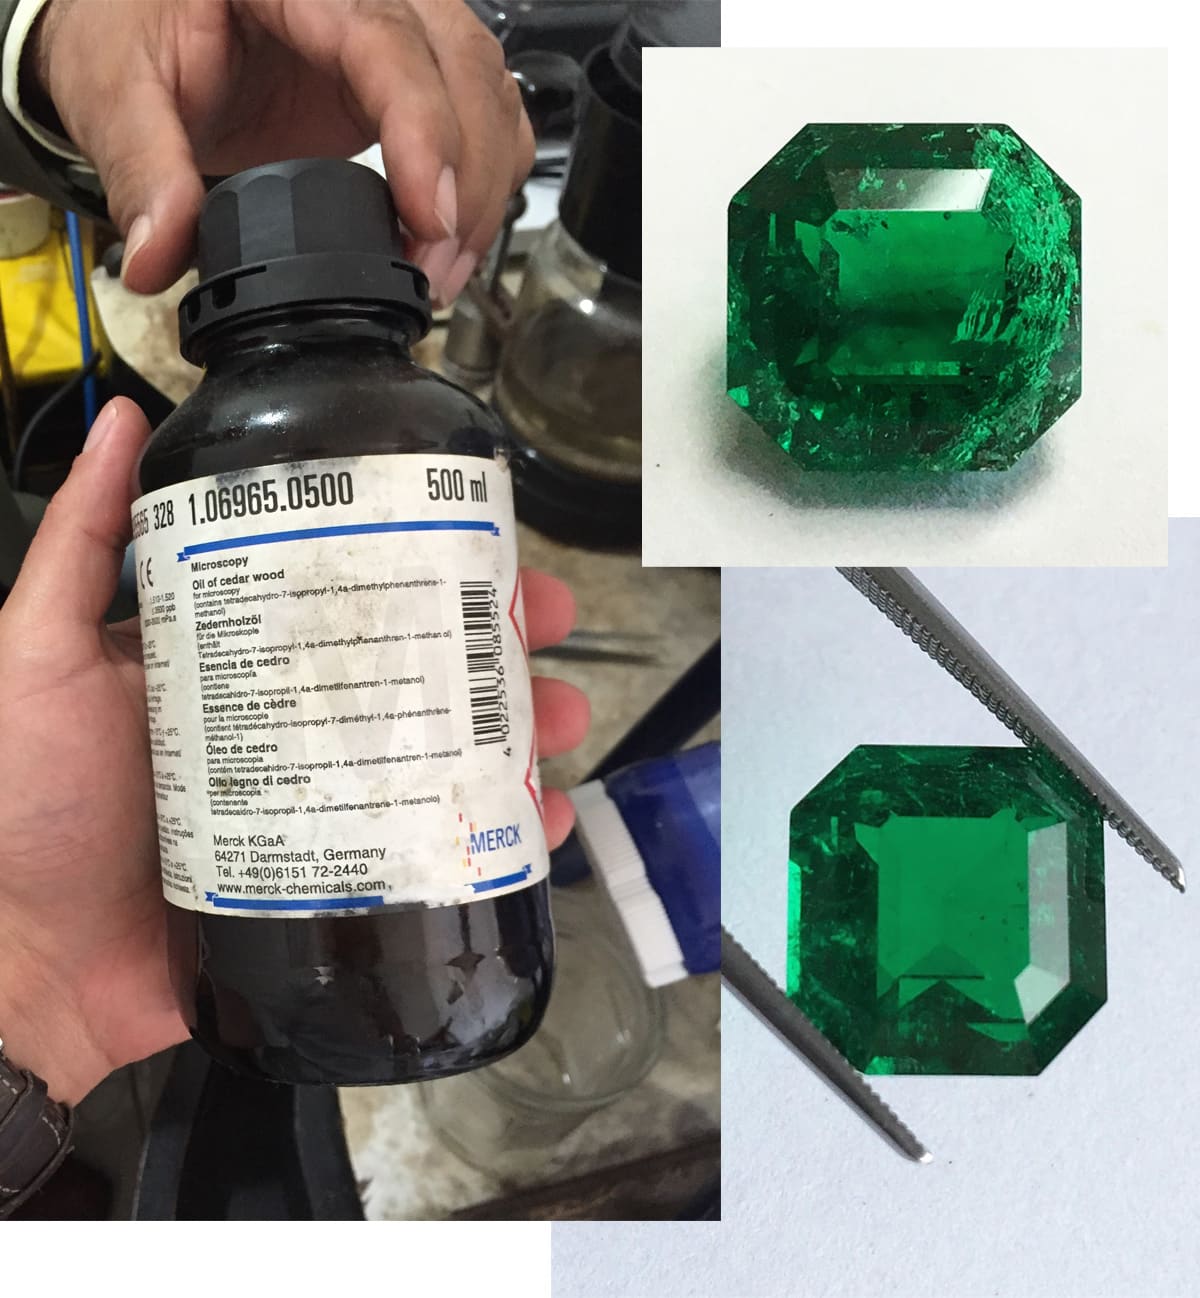 Cedar Oil for Emerald Enhancement - Before and After.